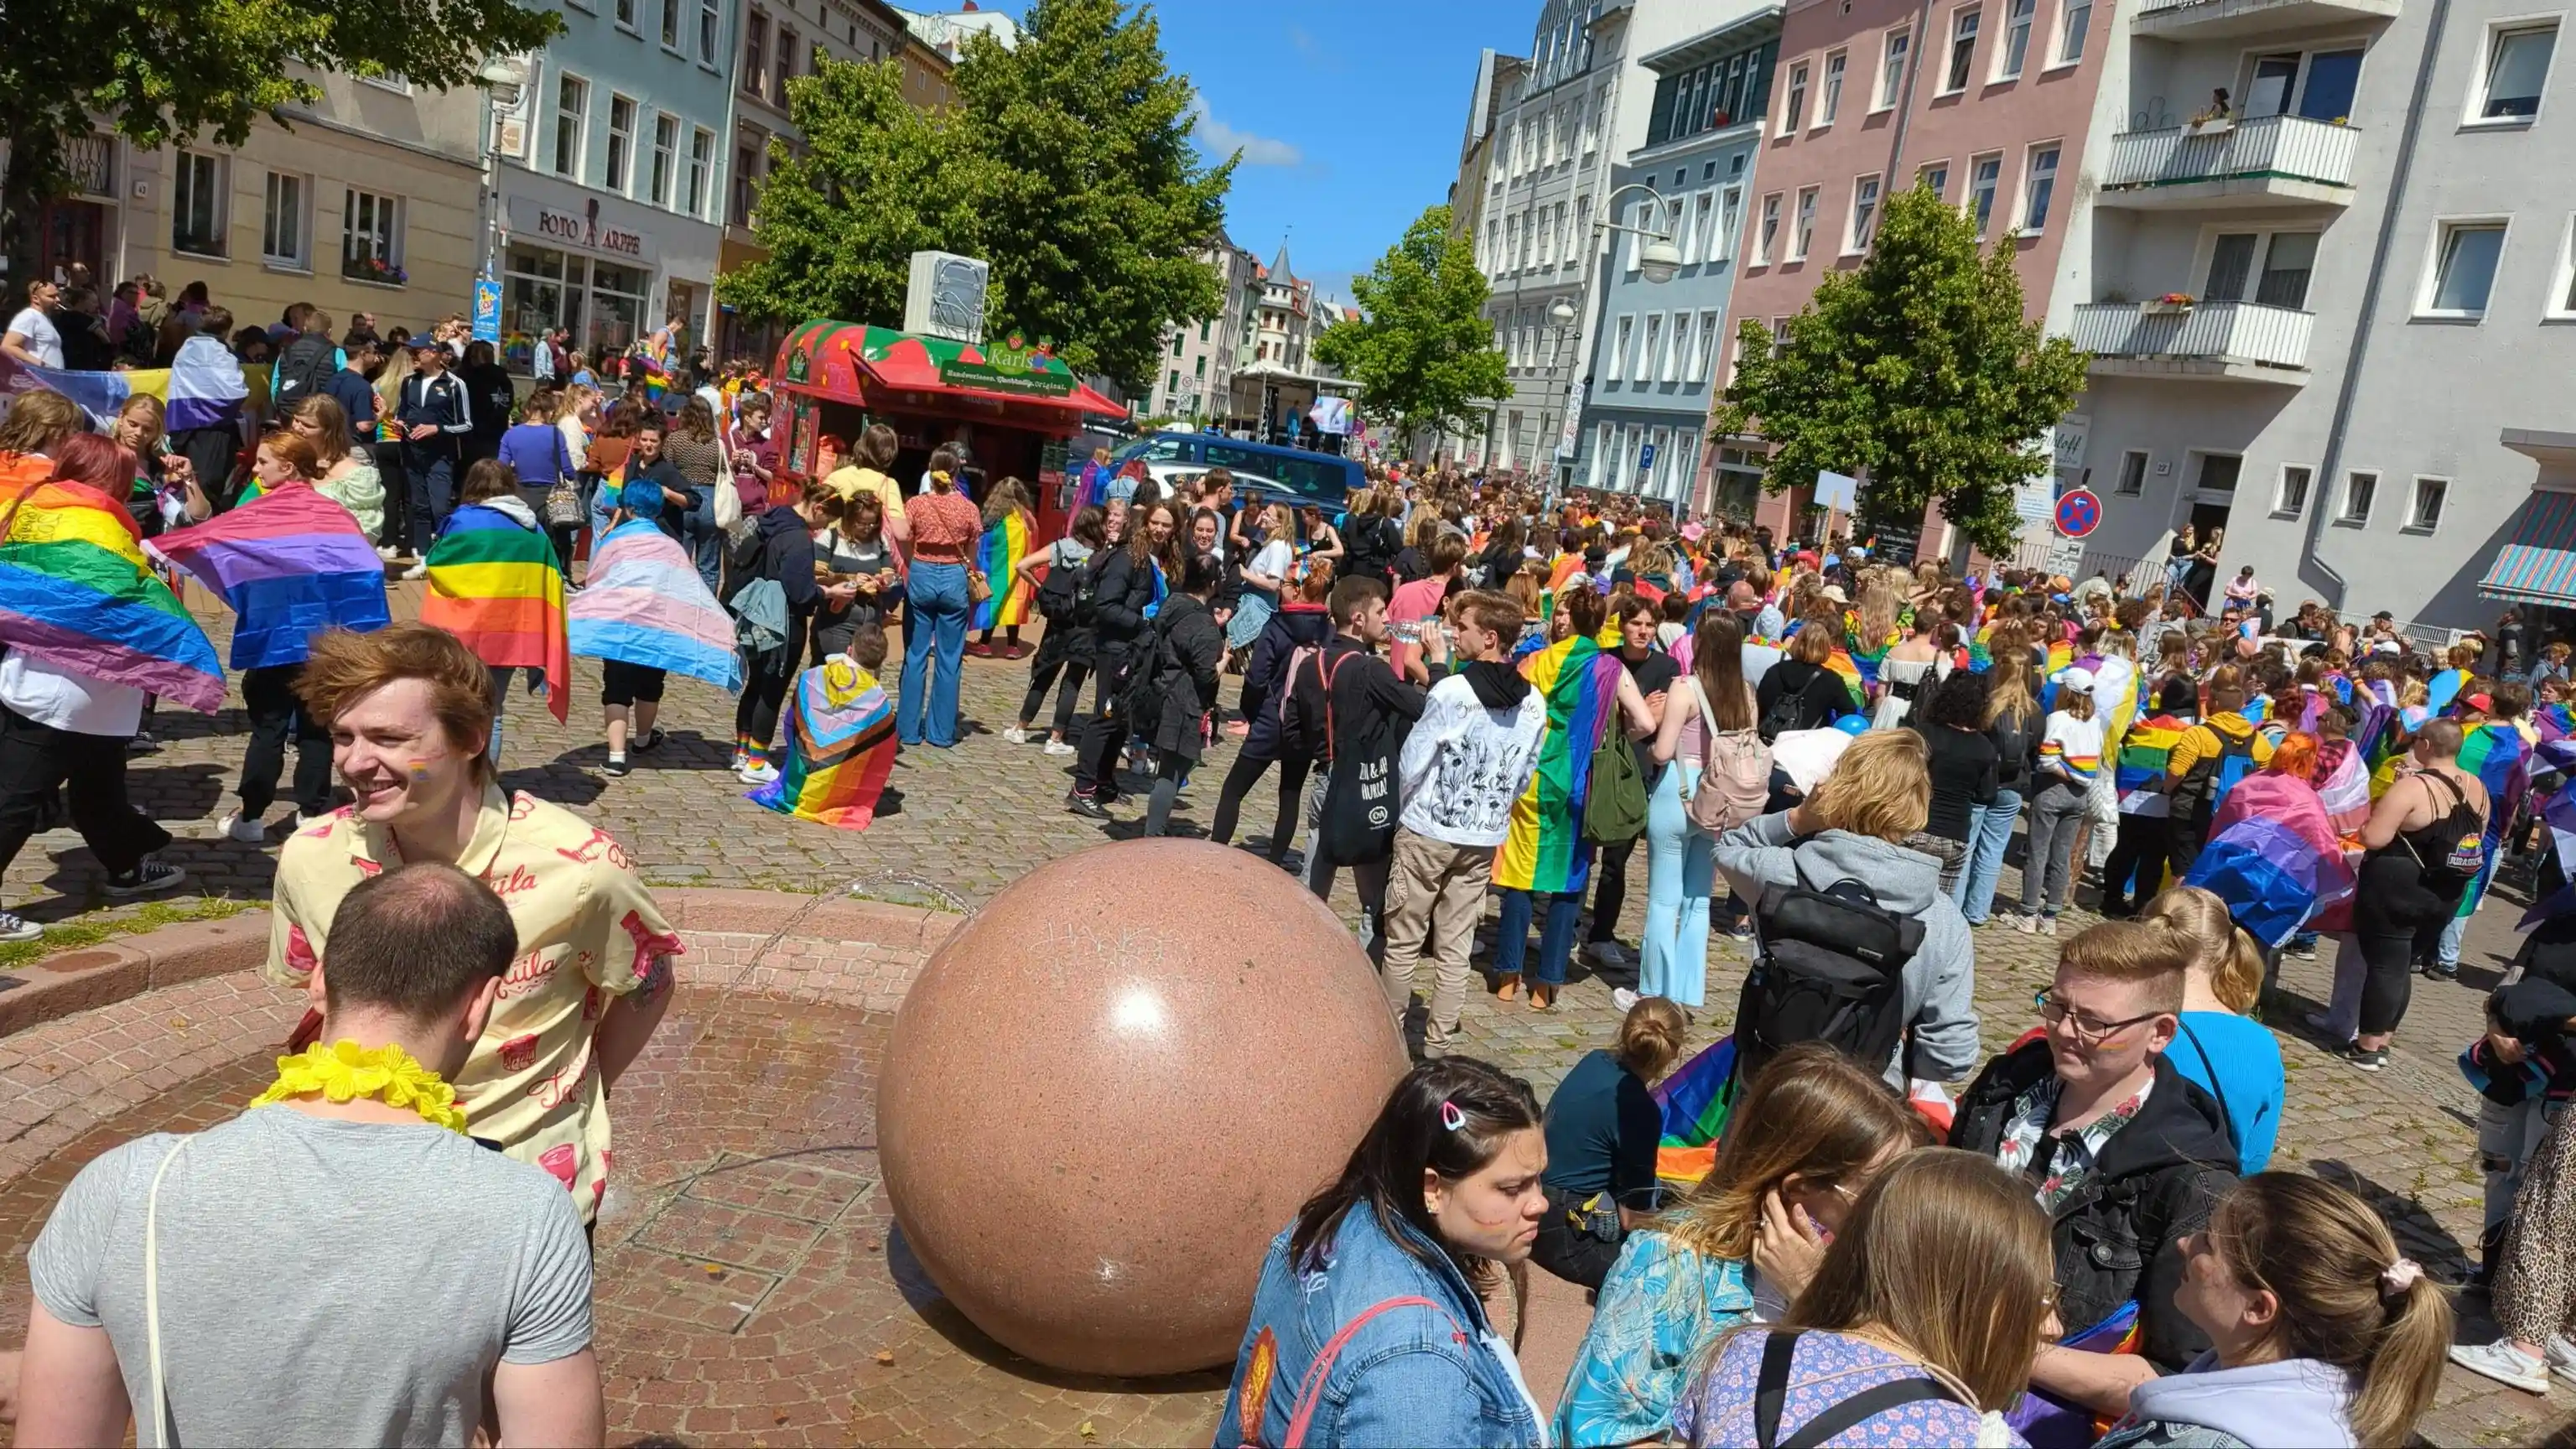 Rainbow people standing on a square